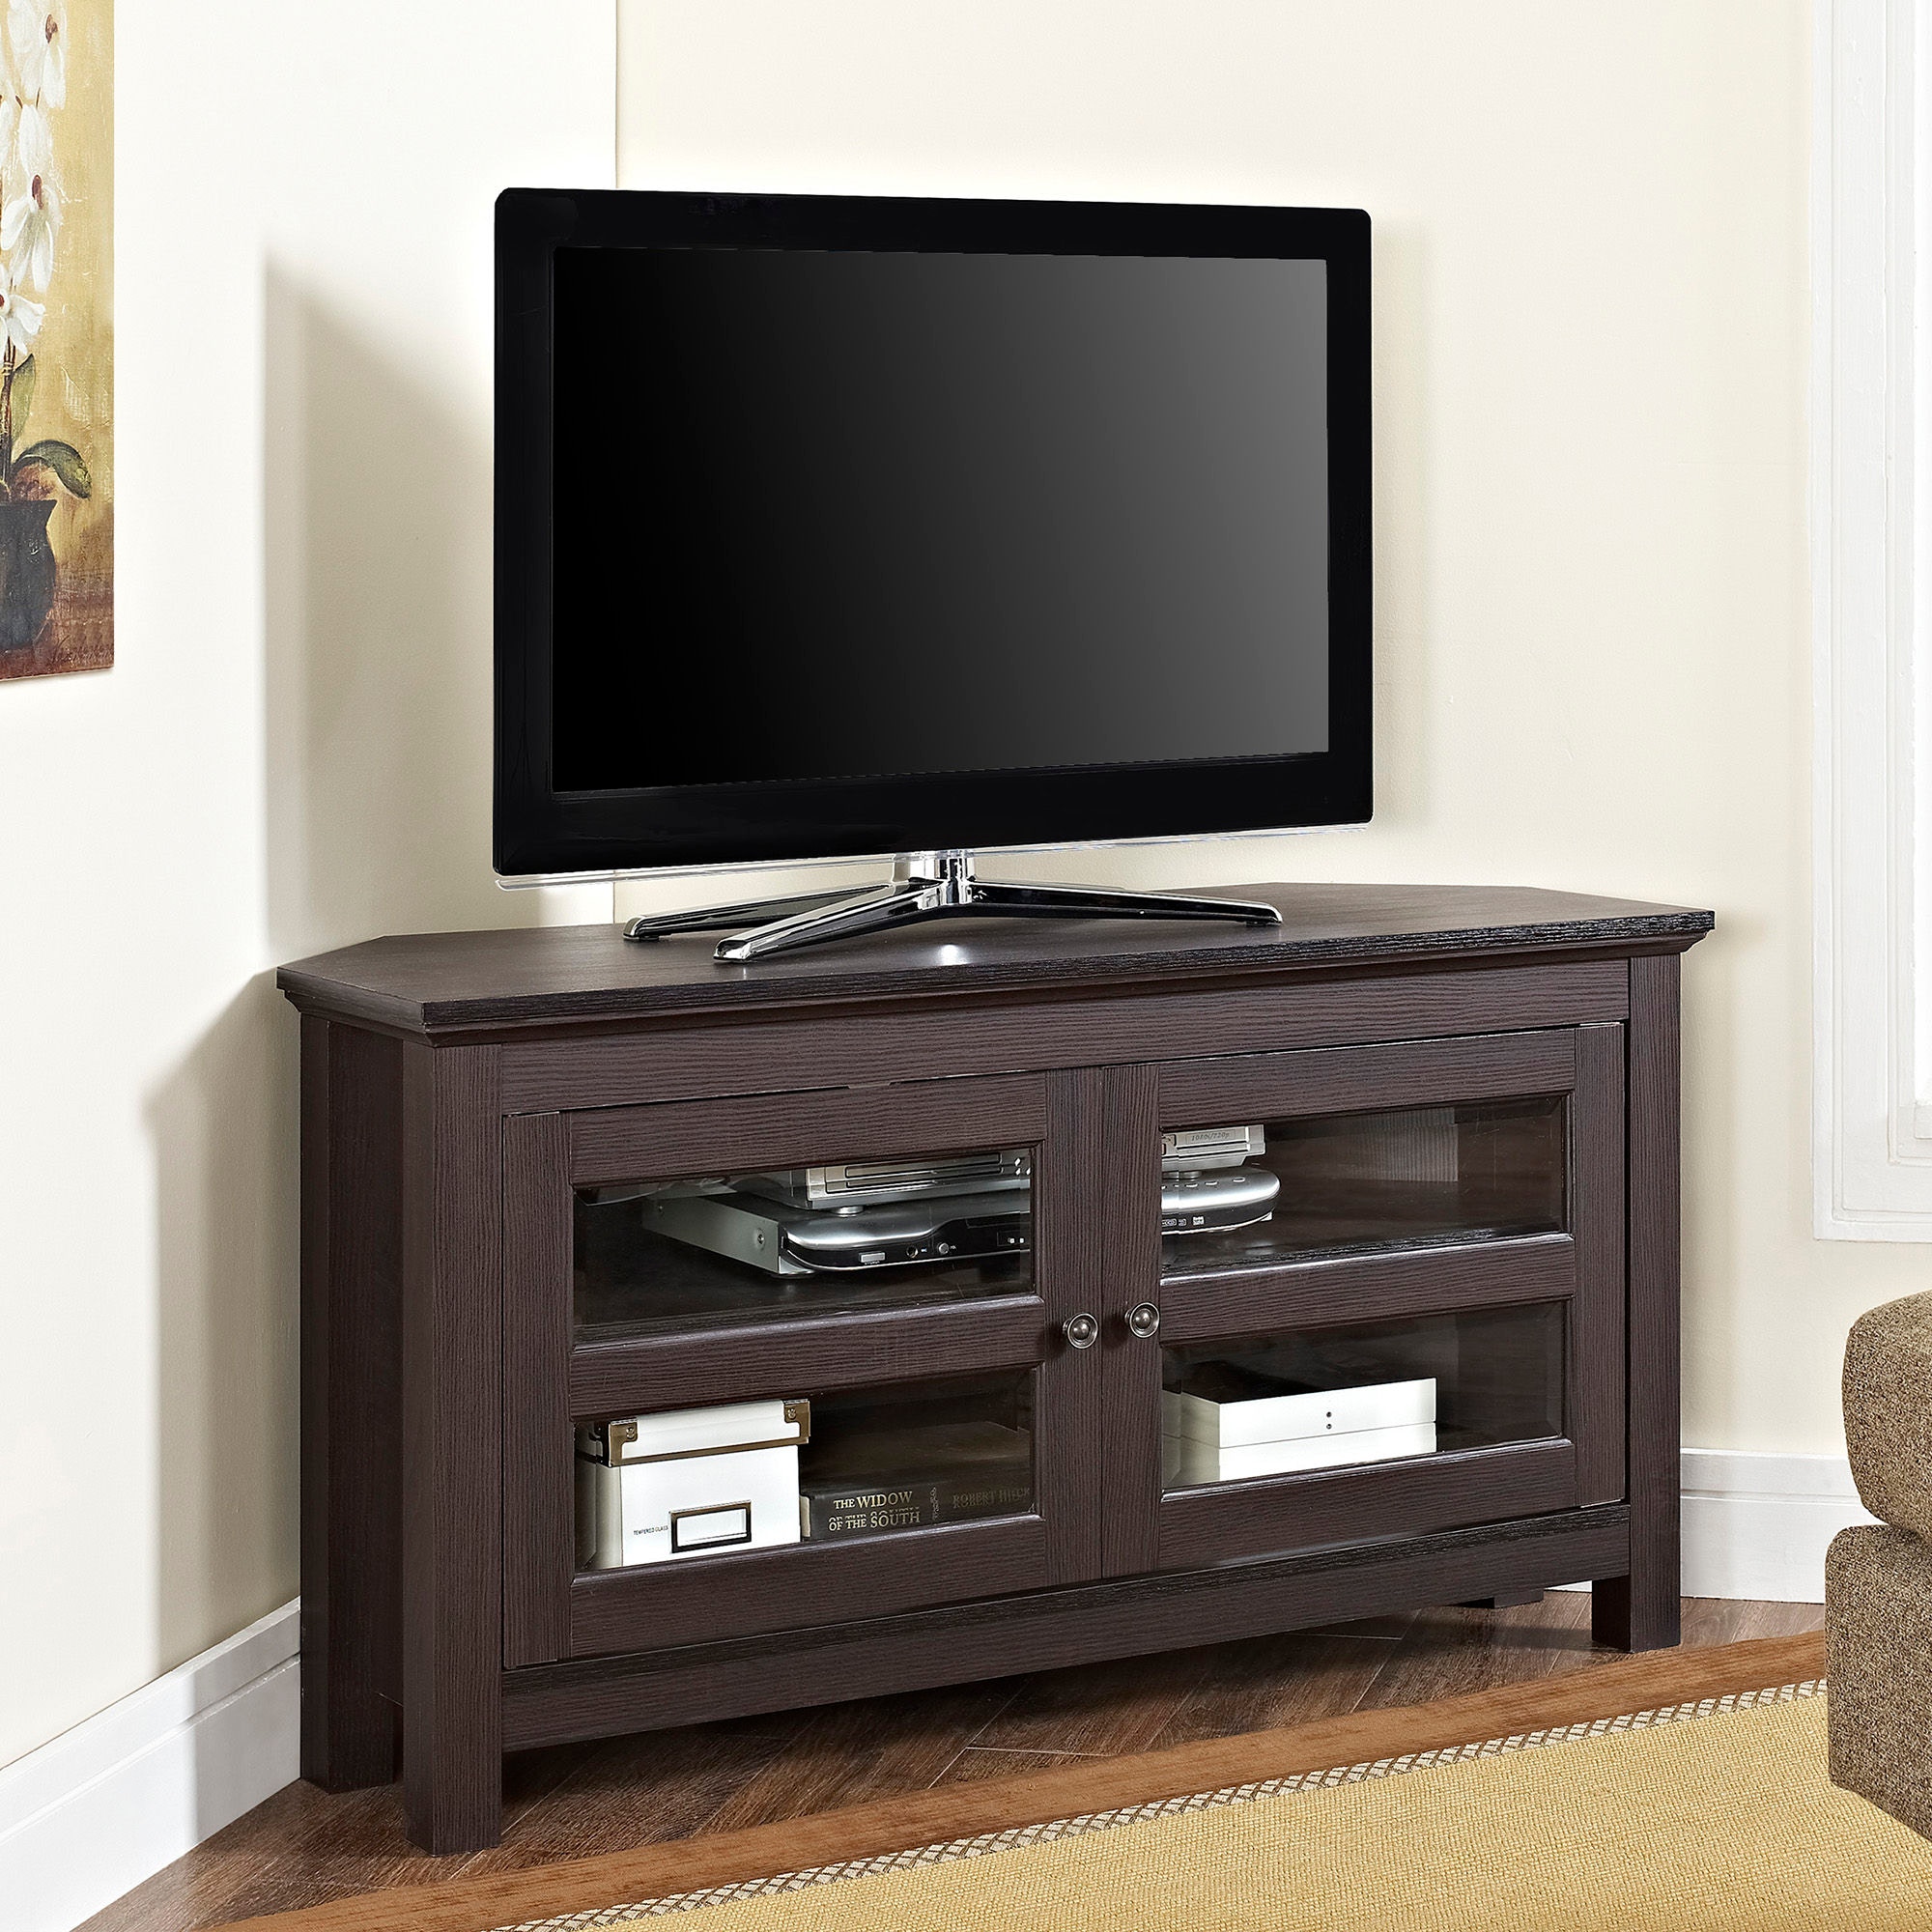 Tv Stand Component Console Display Rack With Storage Cabinet For